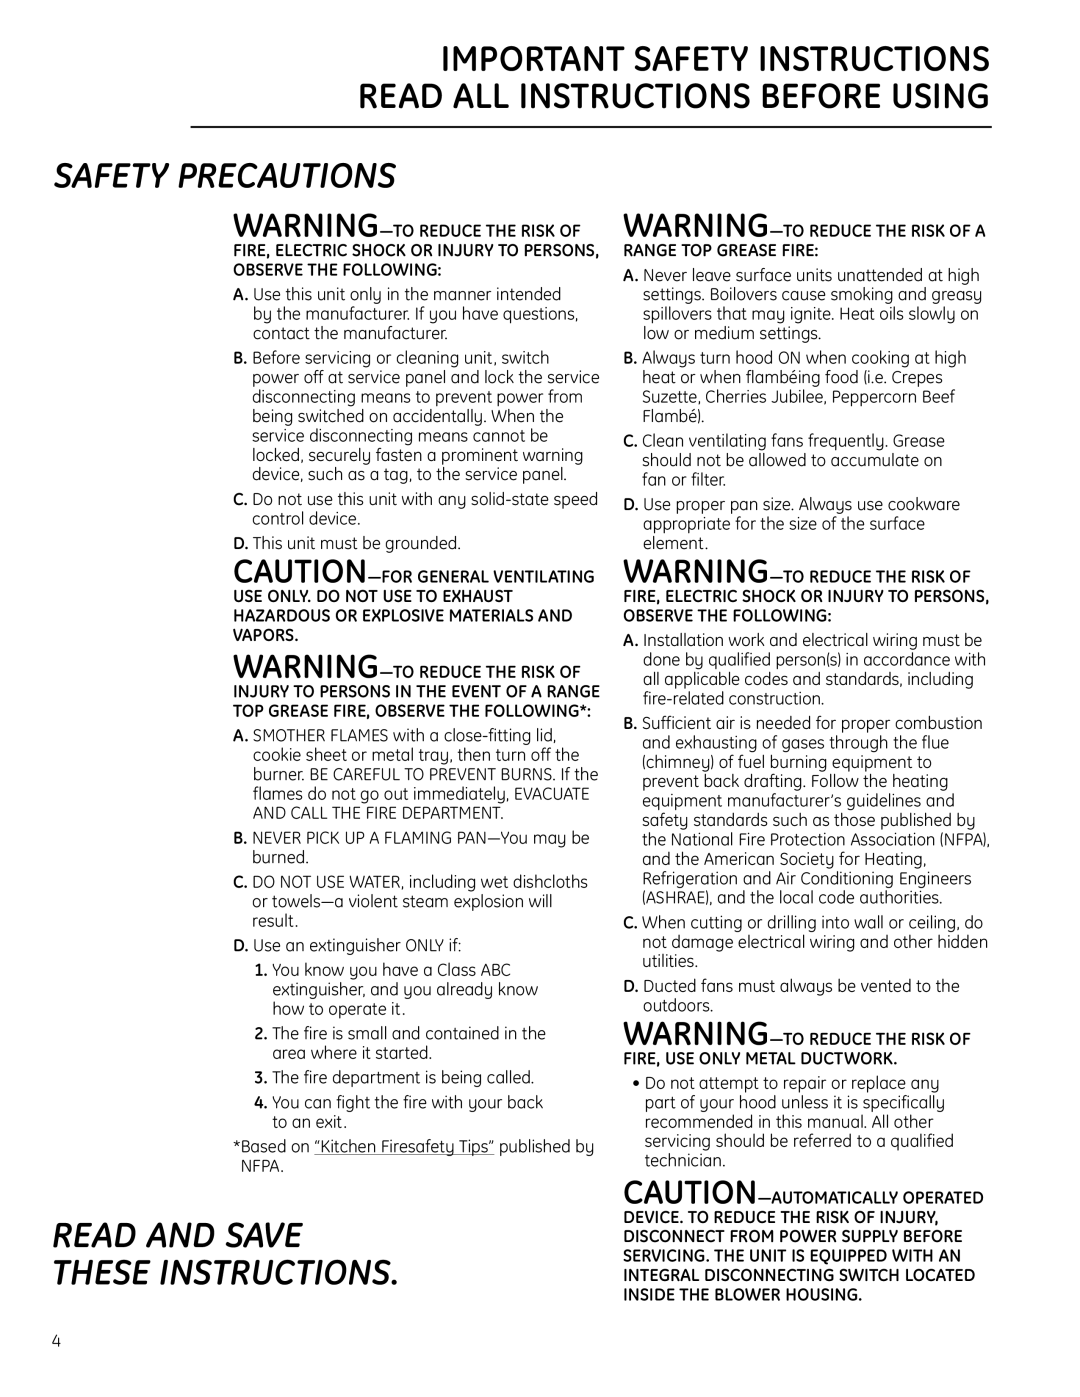 GE Monogram ZVC36LSS, ZVC30LSS Safety Precautions, Read And Save These Instructions, Important Safety Instructions 